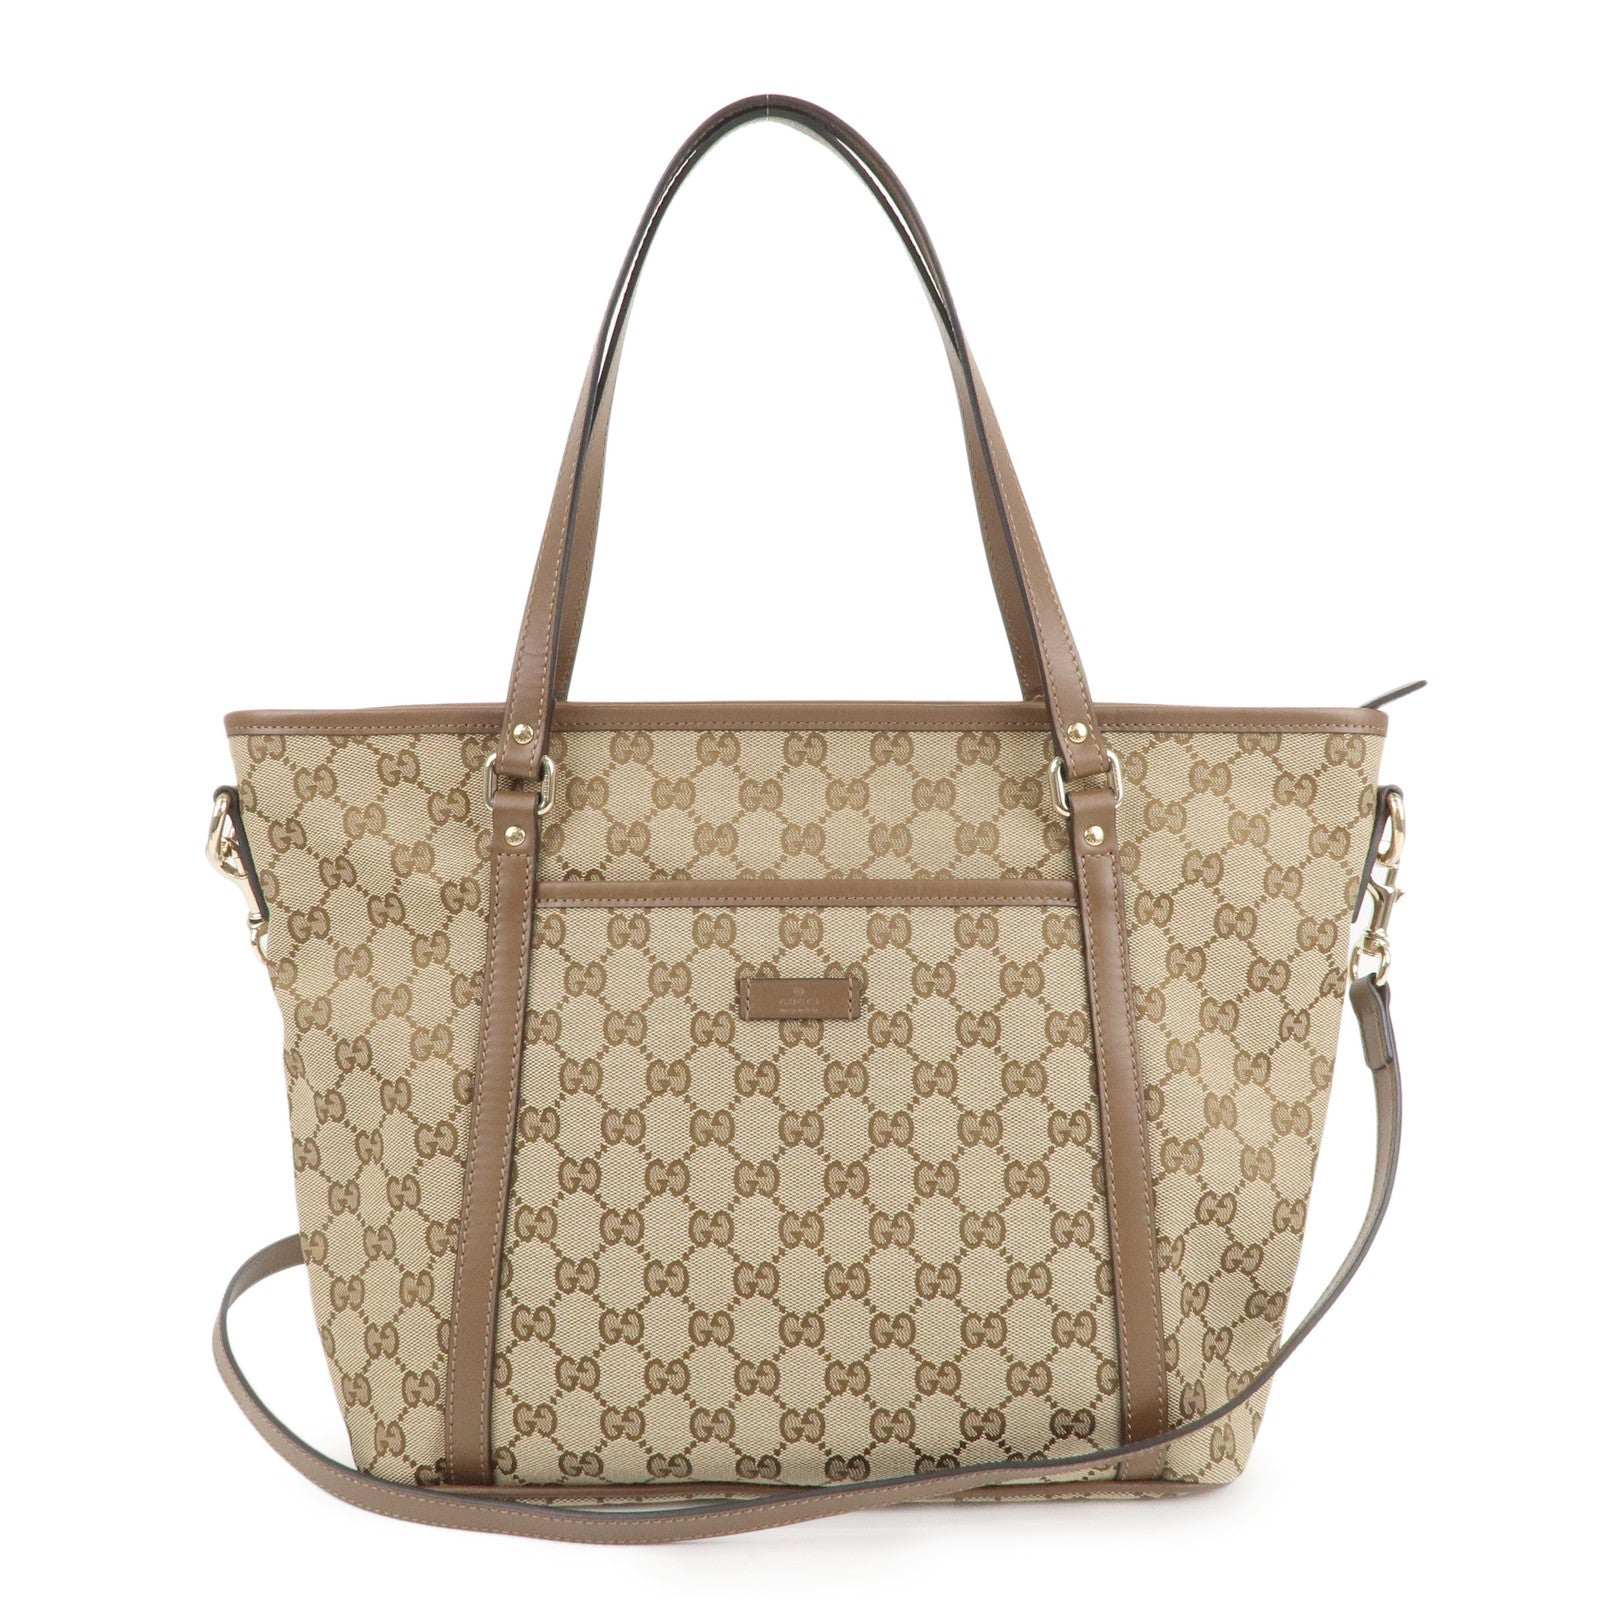 Gucci 2way Tote Bag with Strap